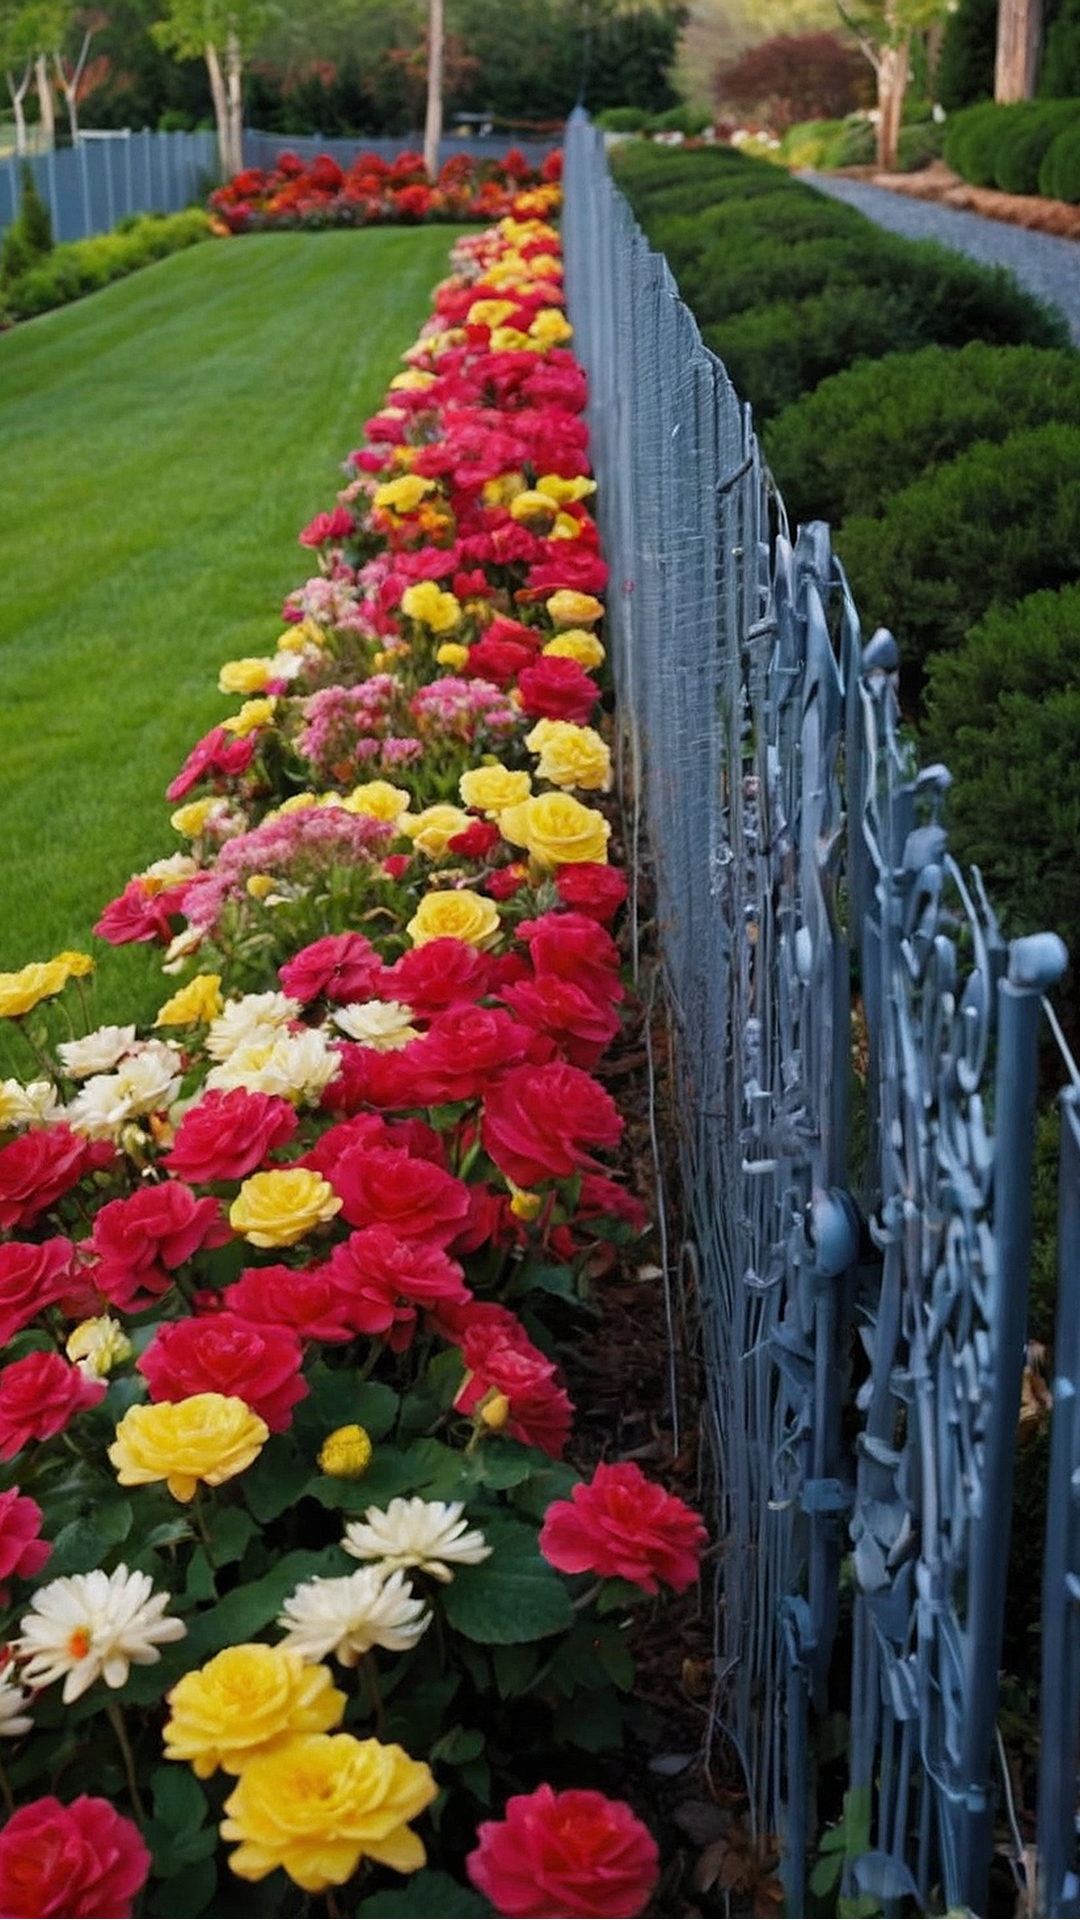 Dividing Delights: Whimsical Fence Line Landscaping Features